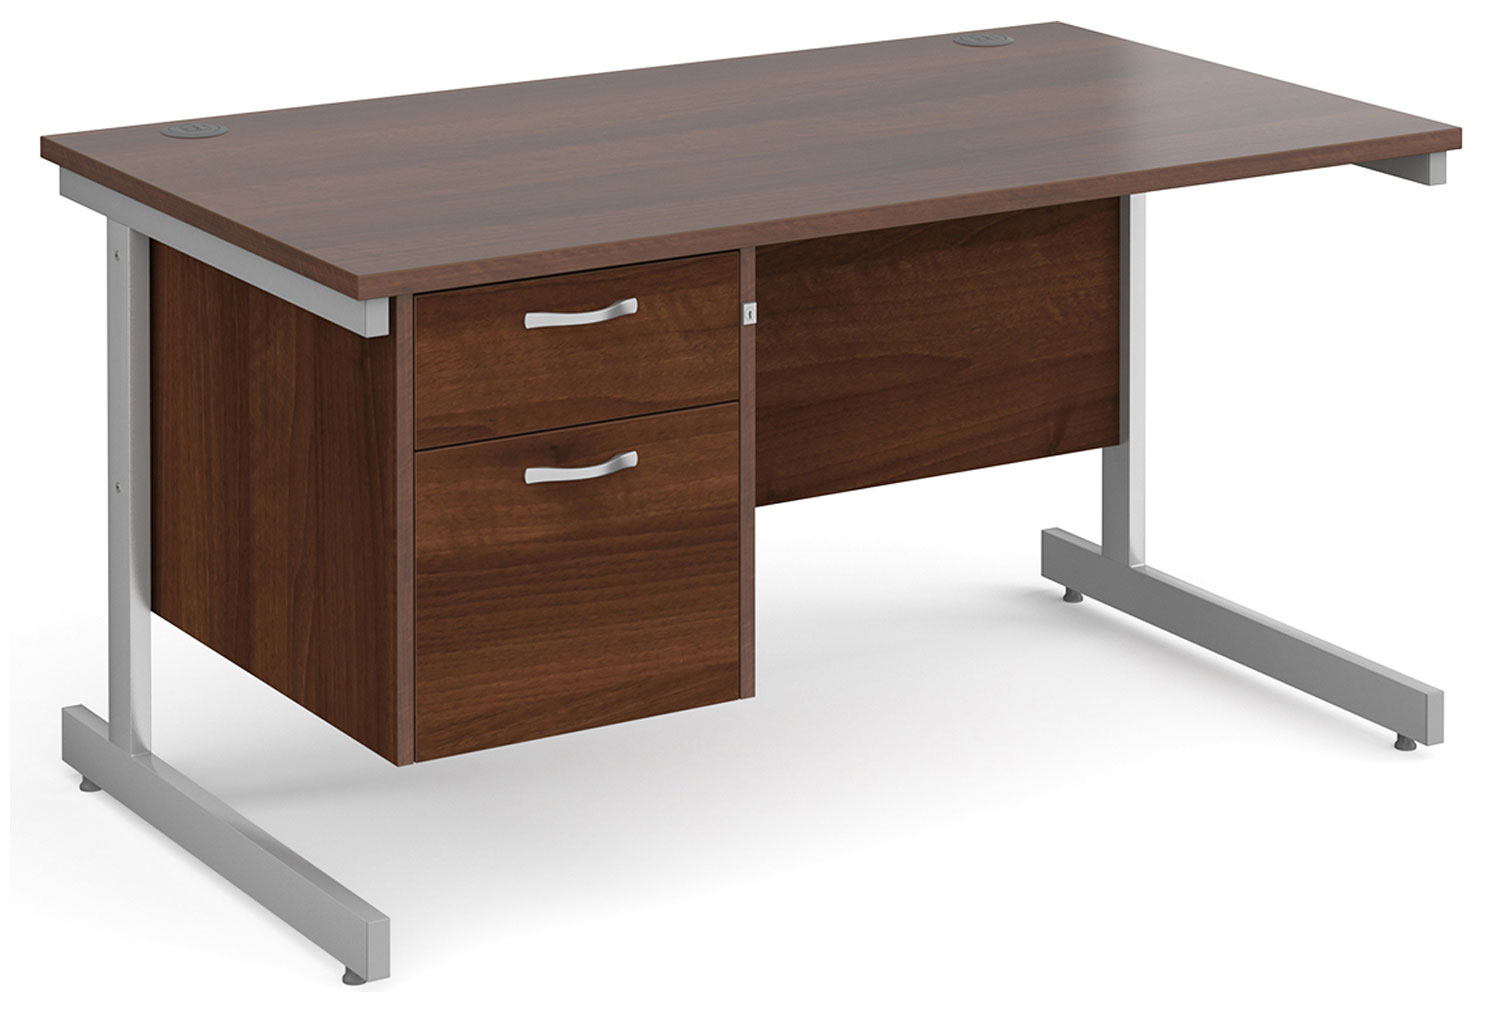 Thrifty Next-Day Rectangular Office Desk 2 Drawers Walnut, 140wx80dx73h (cm), Express Delivery